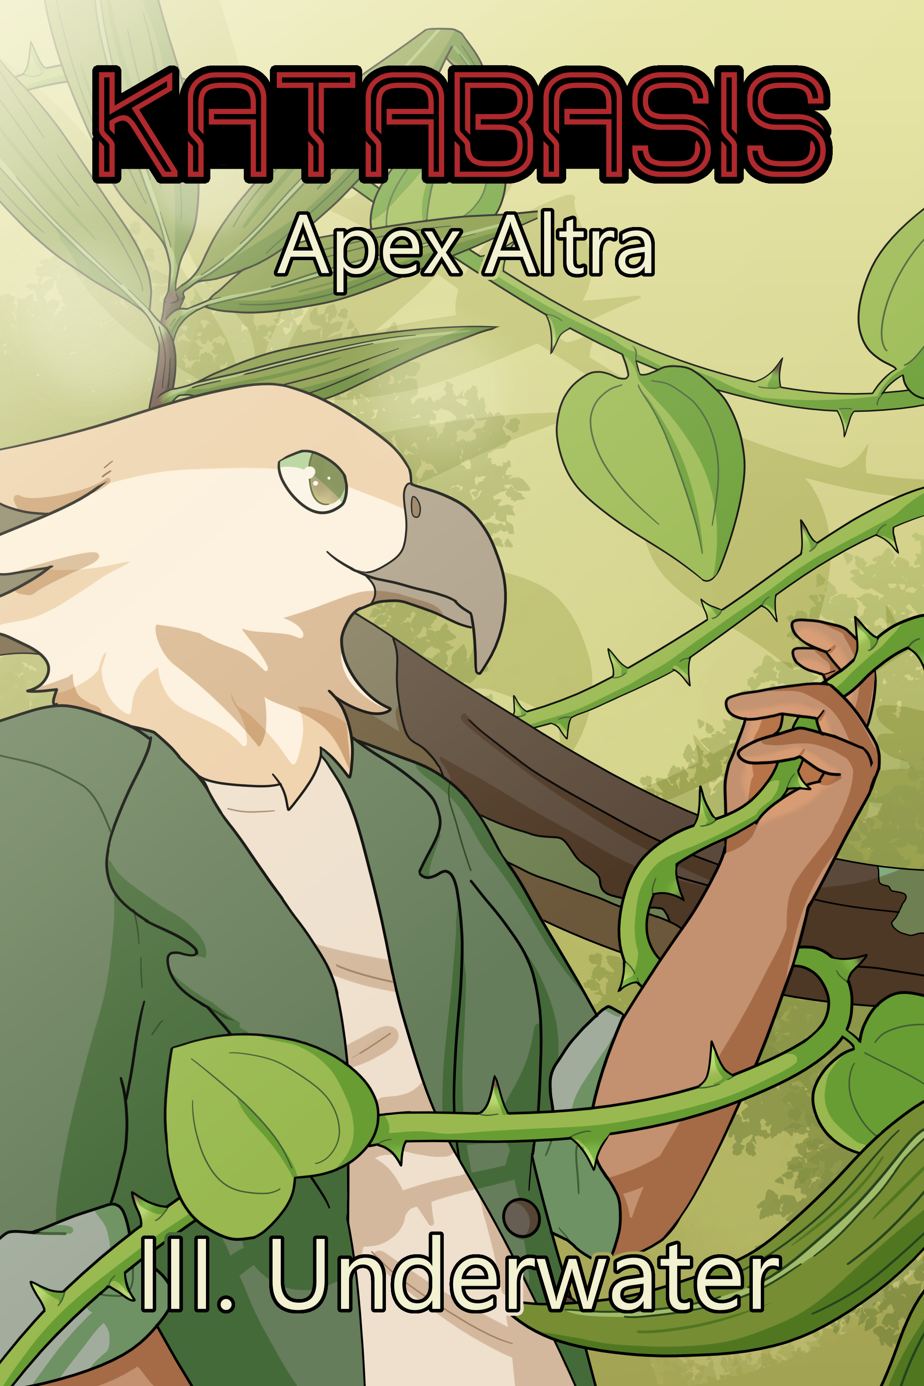 Image: The cover for the third chapter of Katabasis. Text at the top reads: Katabasis, Apex Altra. Text at the bottom reads: III. Underwater. On the cover is Julia wearing her usual tan shirt and green jacket, pictured from the waist up and looking to the right. She’s holding up a greenbriar vine which trails in front of her. Behind her are more greenbriar, switchcane, and muscadine plants. The background is pale yellow and olive green, and decorated with silhouettes of leaves. End description.